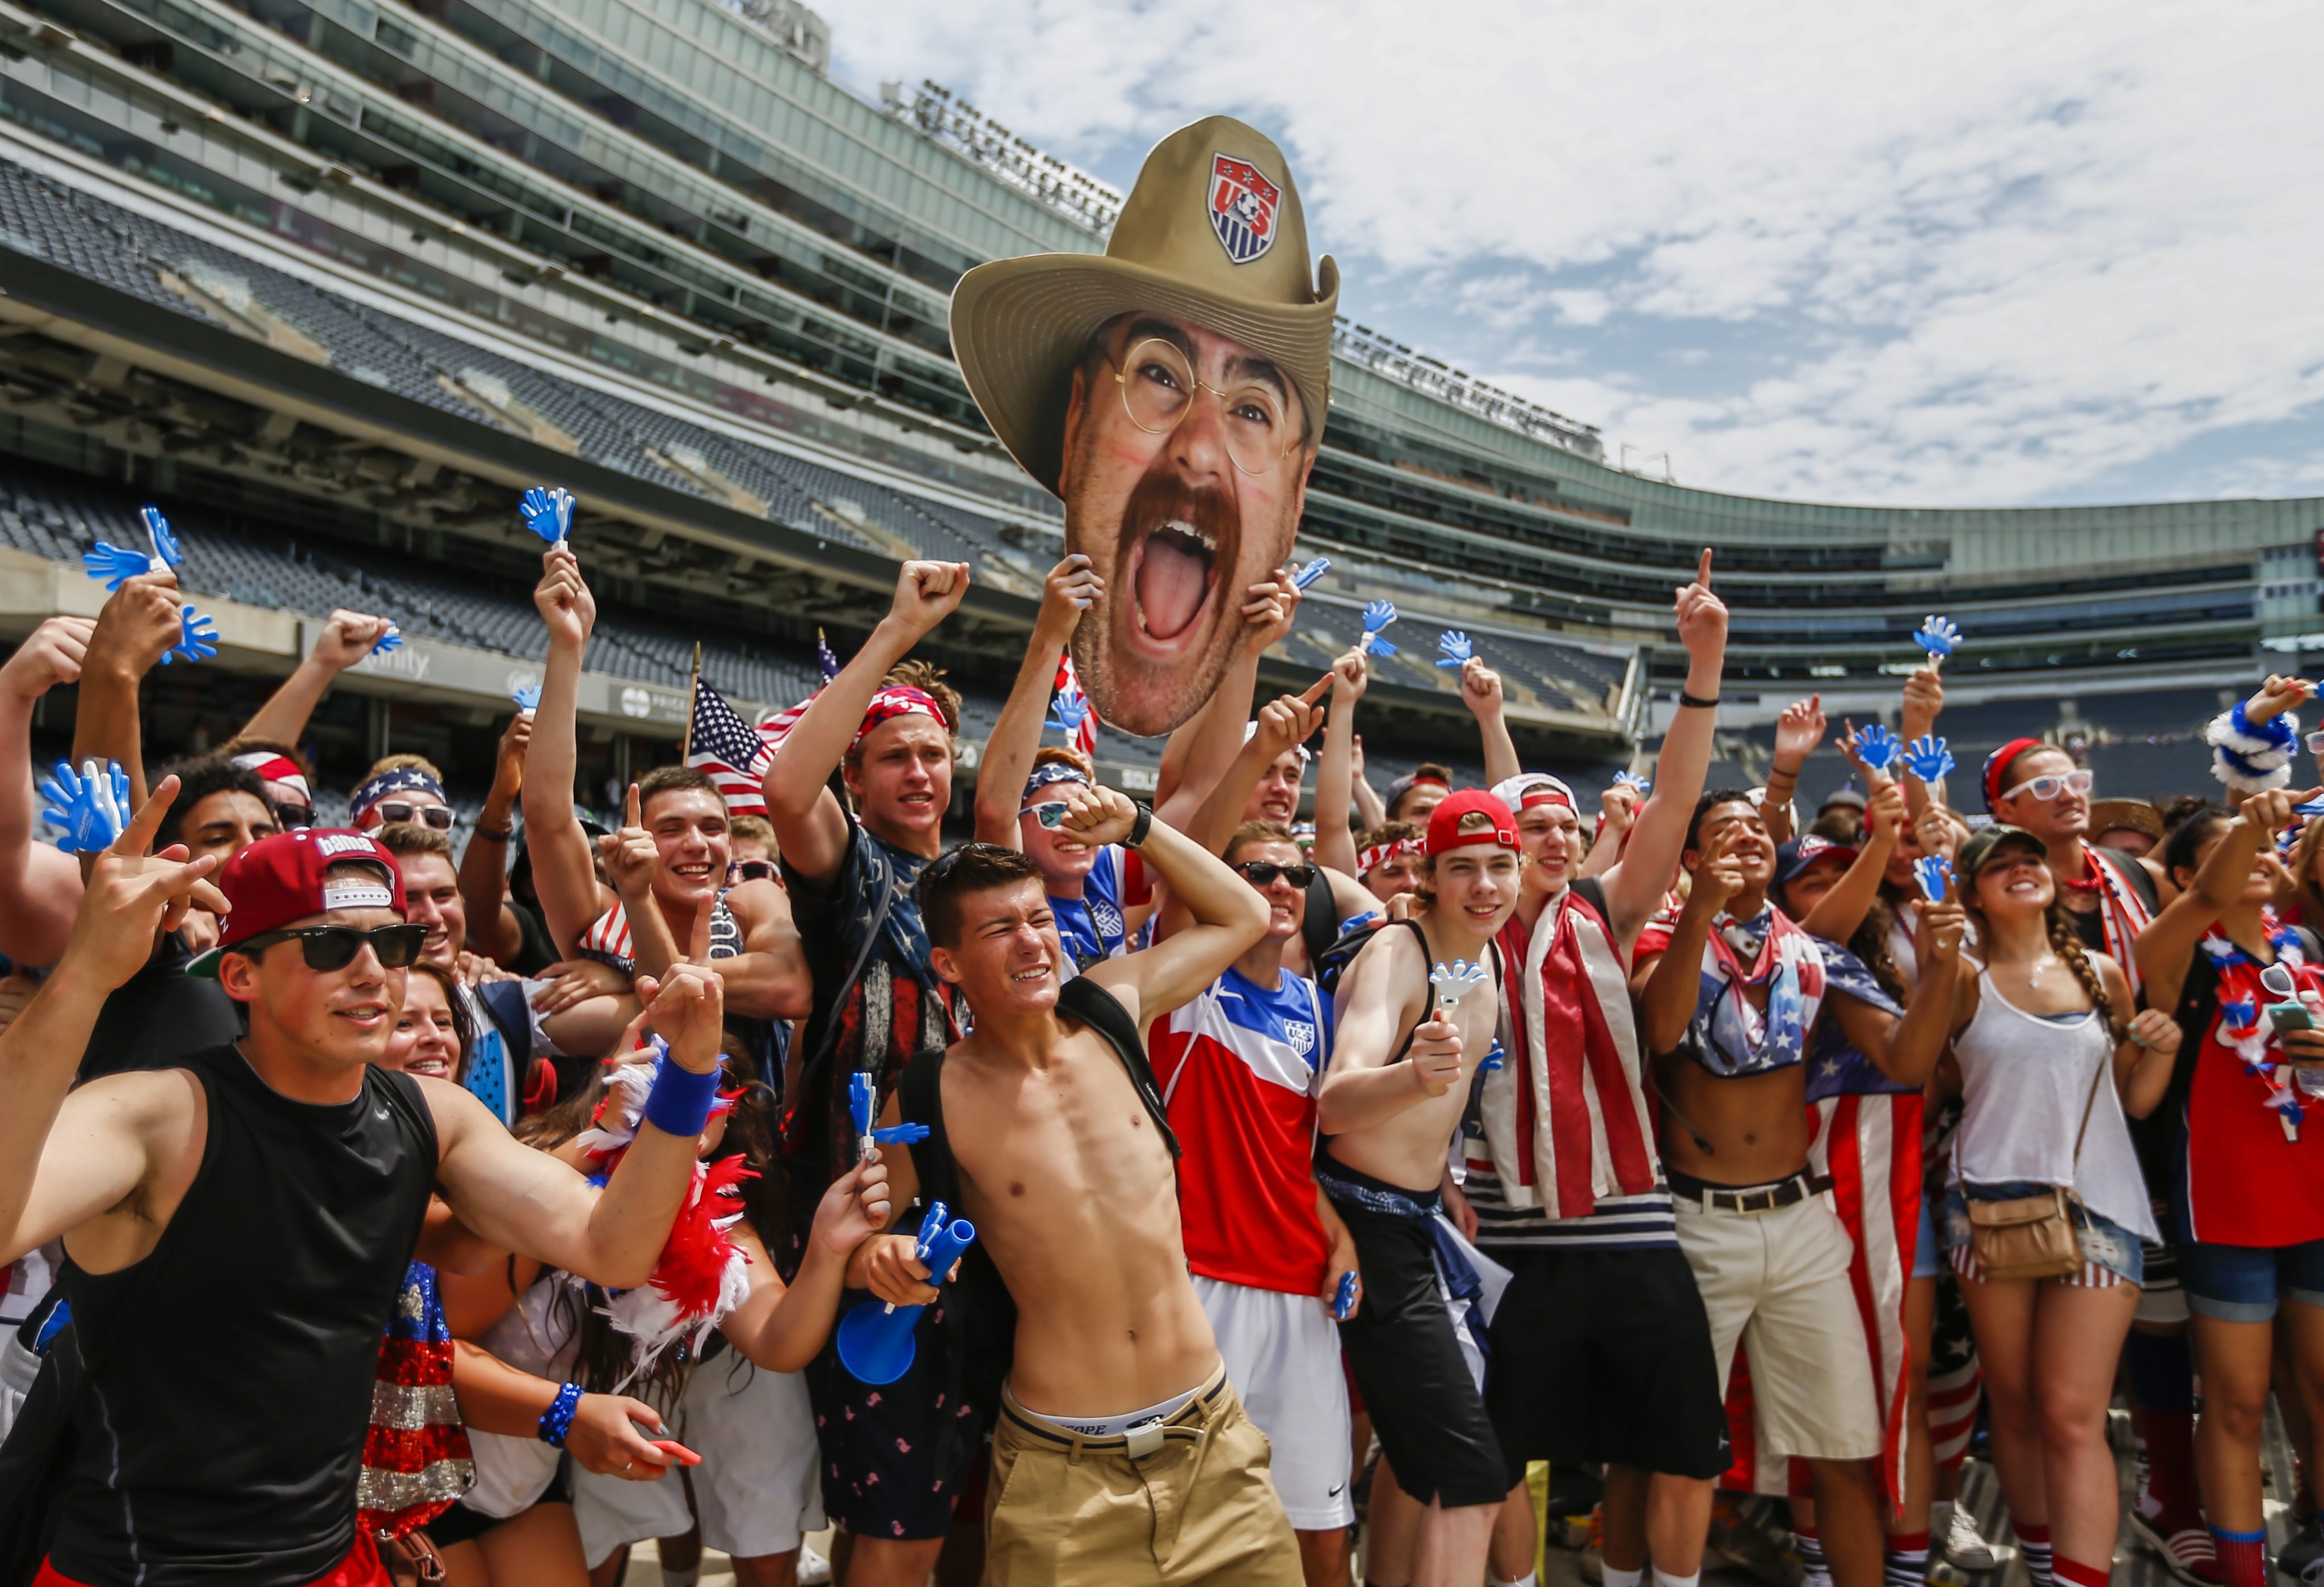 US fans cheer before the start of the match between the USA and Belgium played at the Arena Fonte Nova in Salvador, Brazil, at Soldier Field in Chicago, Illinois on  July 1, 2014.